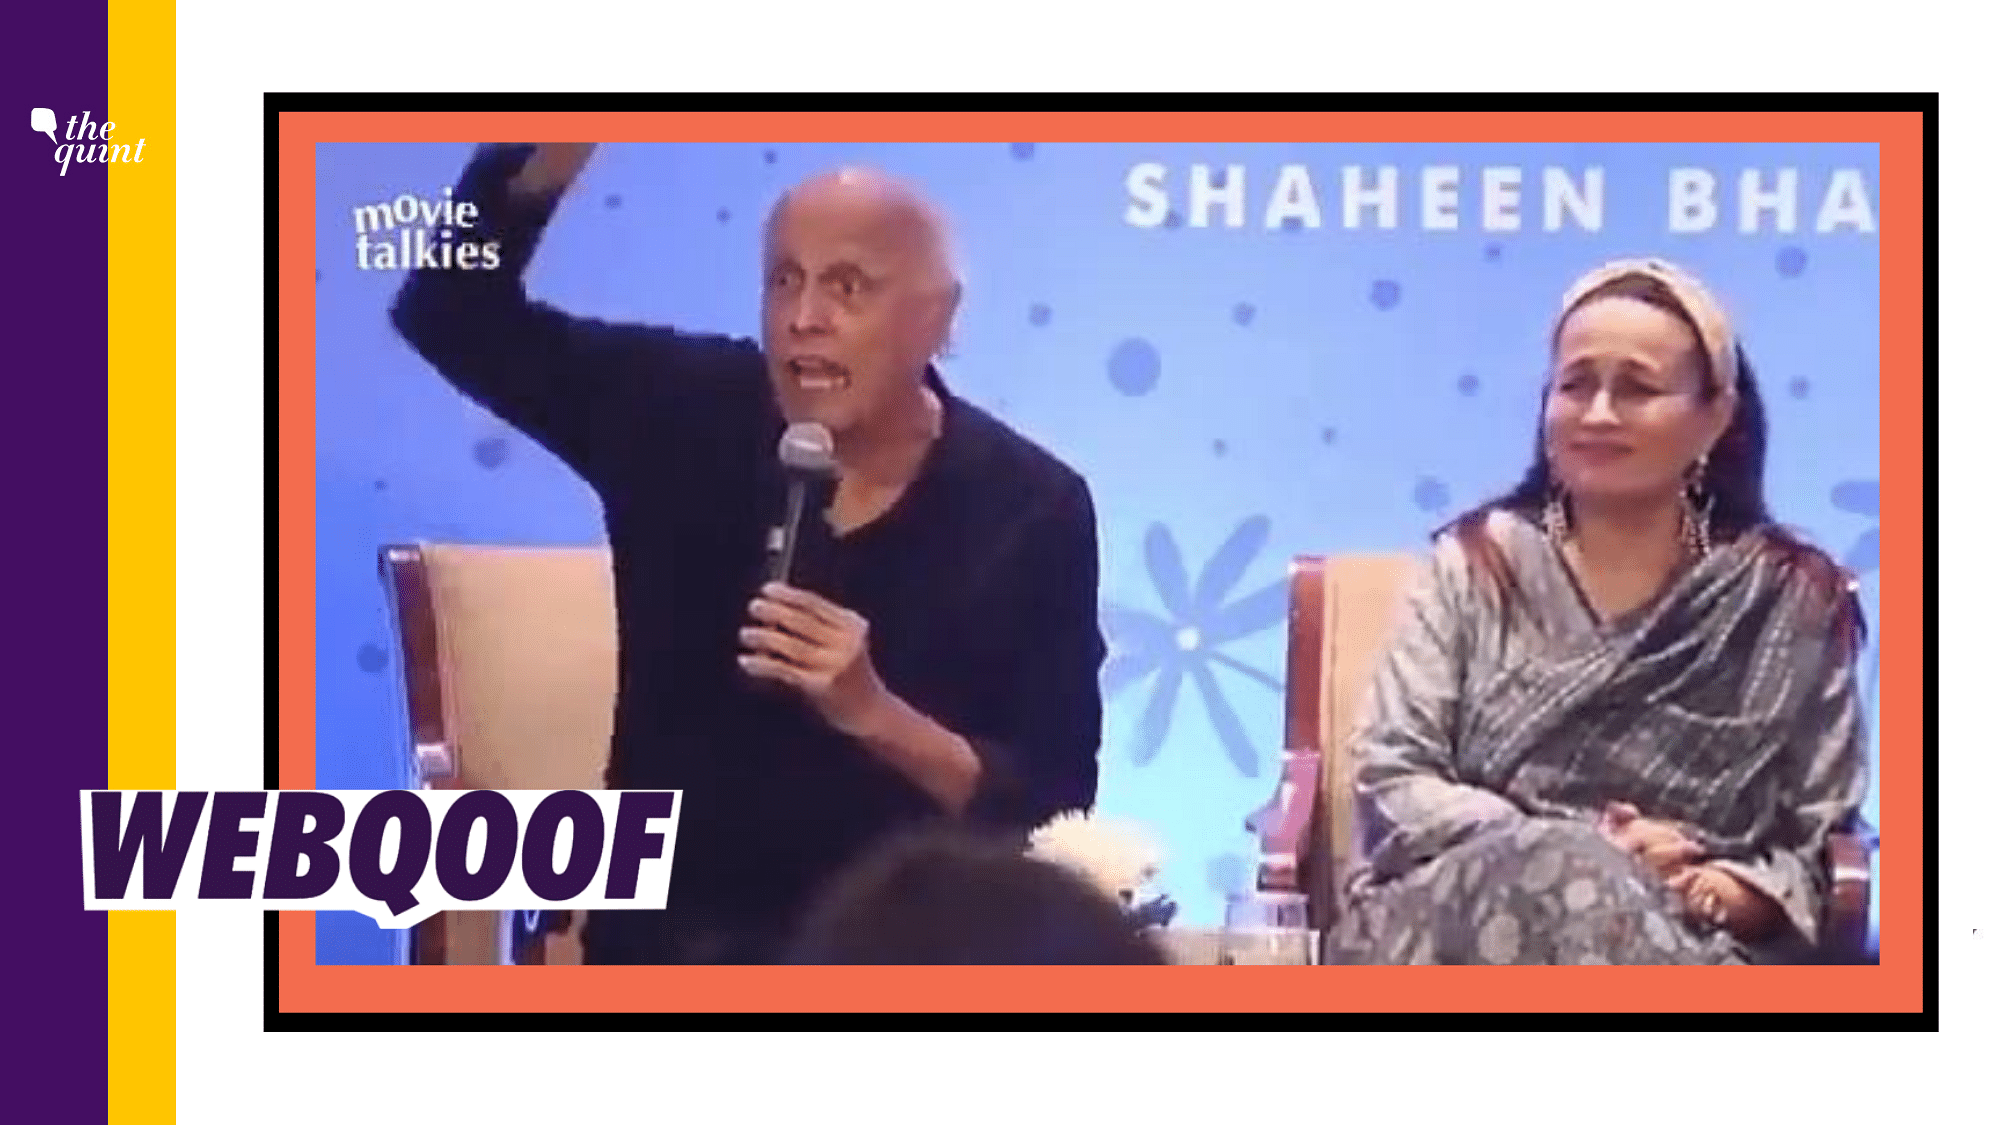 The video is actually of 2019, from his daughter Shaheen Bhatt's book launch. 